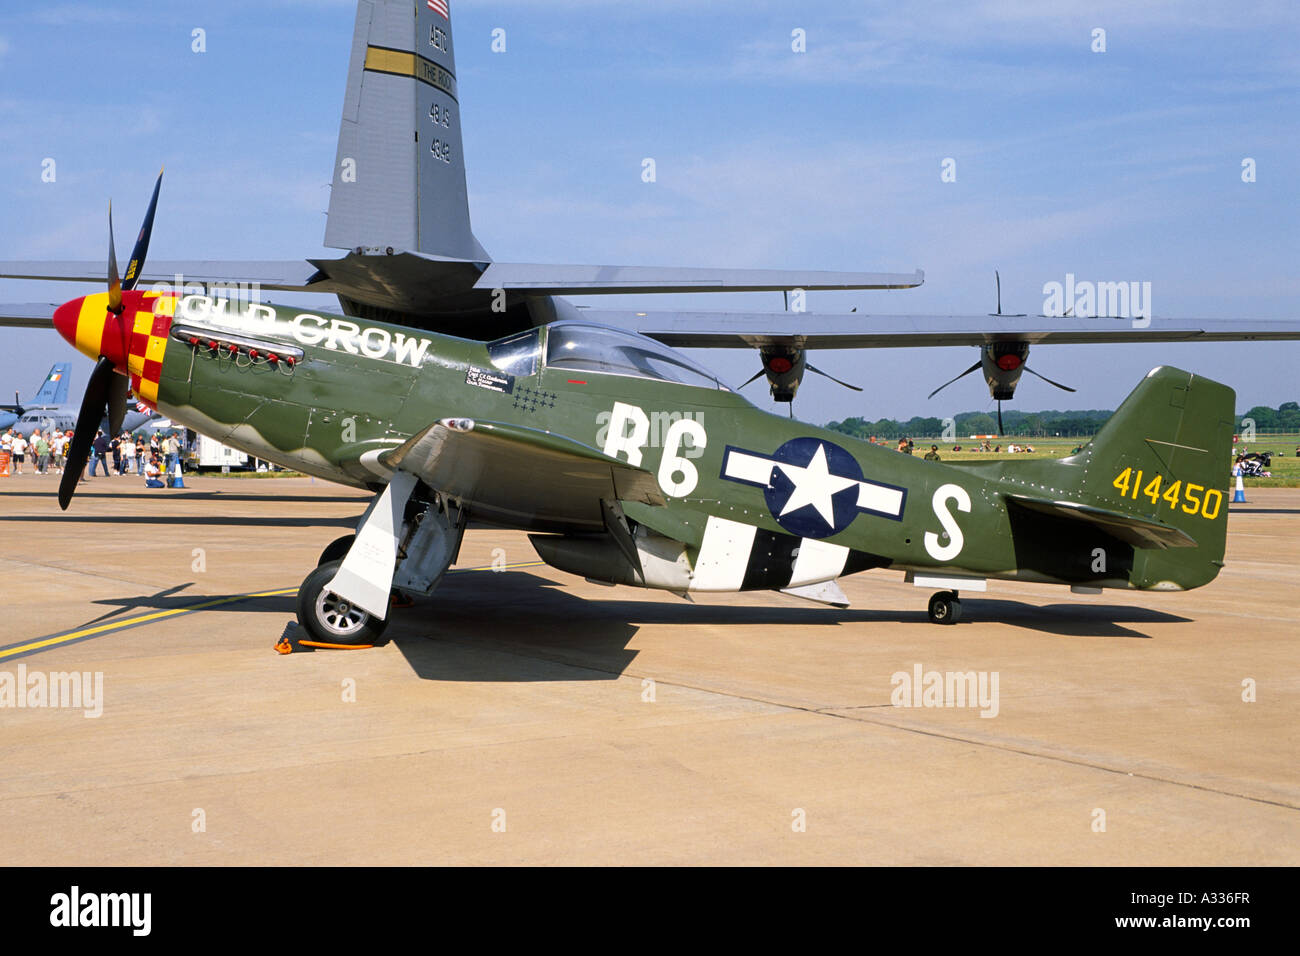 P-51 Mustang, Old Crow, USAAF Markierungen, Fairford, England. North American P-51D Mustang. Stockfoto